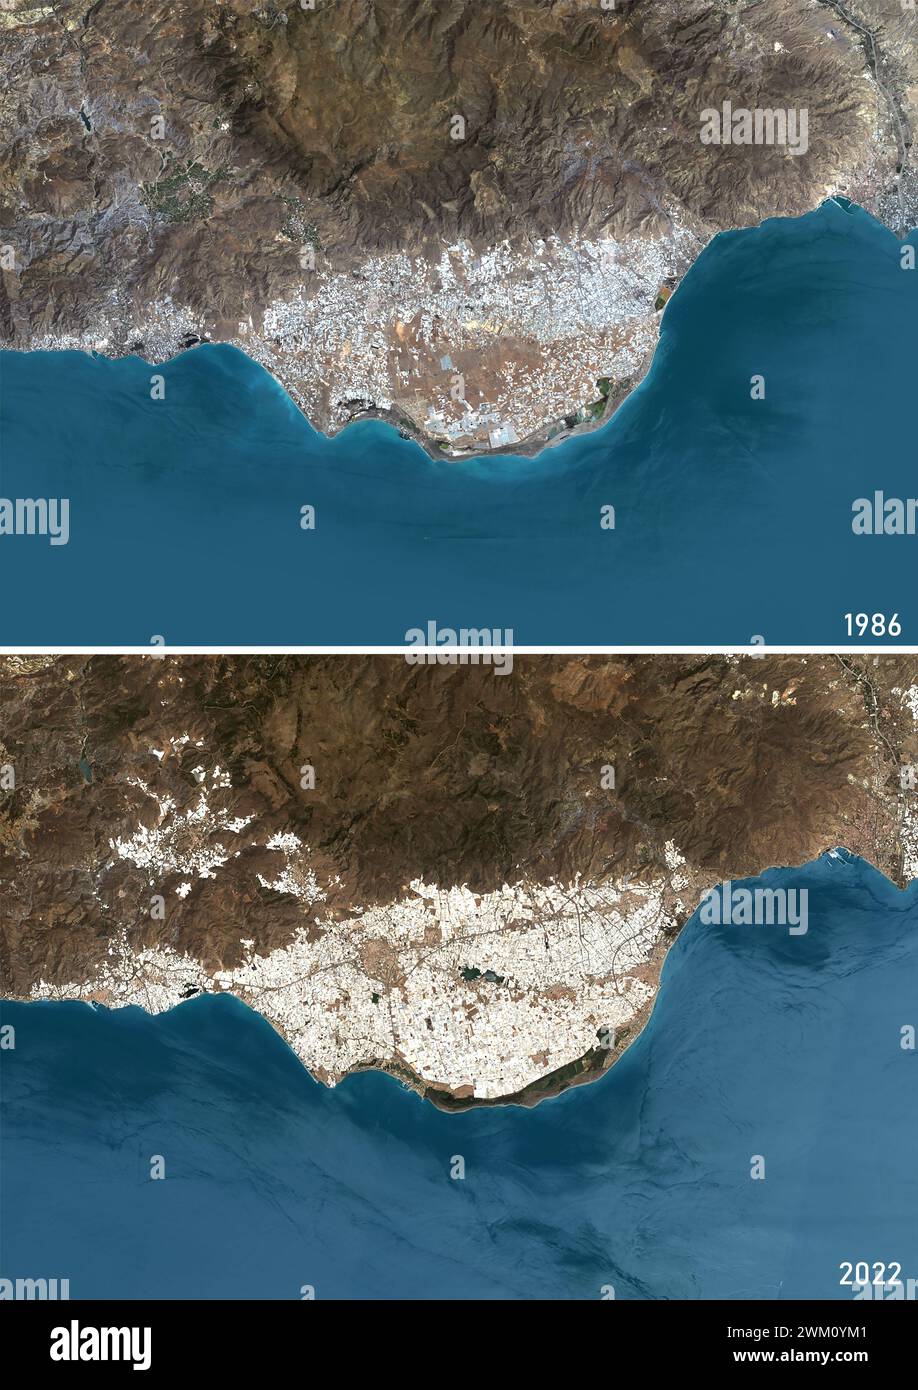 Color satellite image of intensive farming in Almeria, Spain between 1986 and 2022. The images show how the 'plastic sea' formed by greenhouses has expanded. Stock Photo